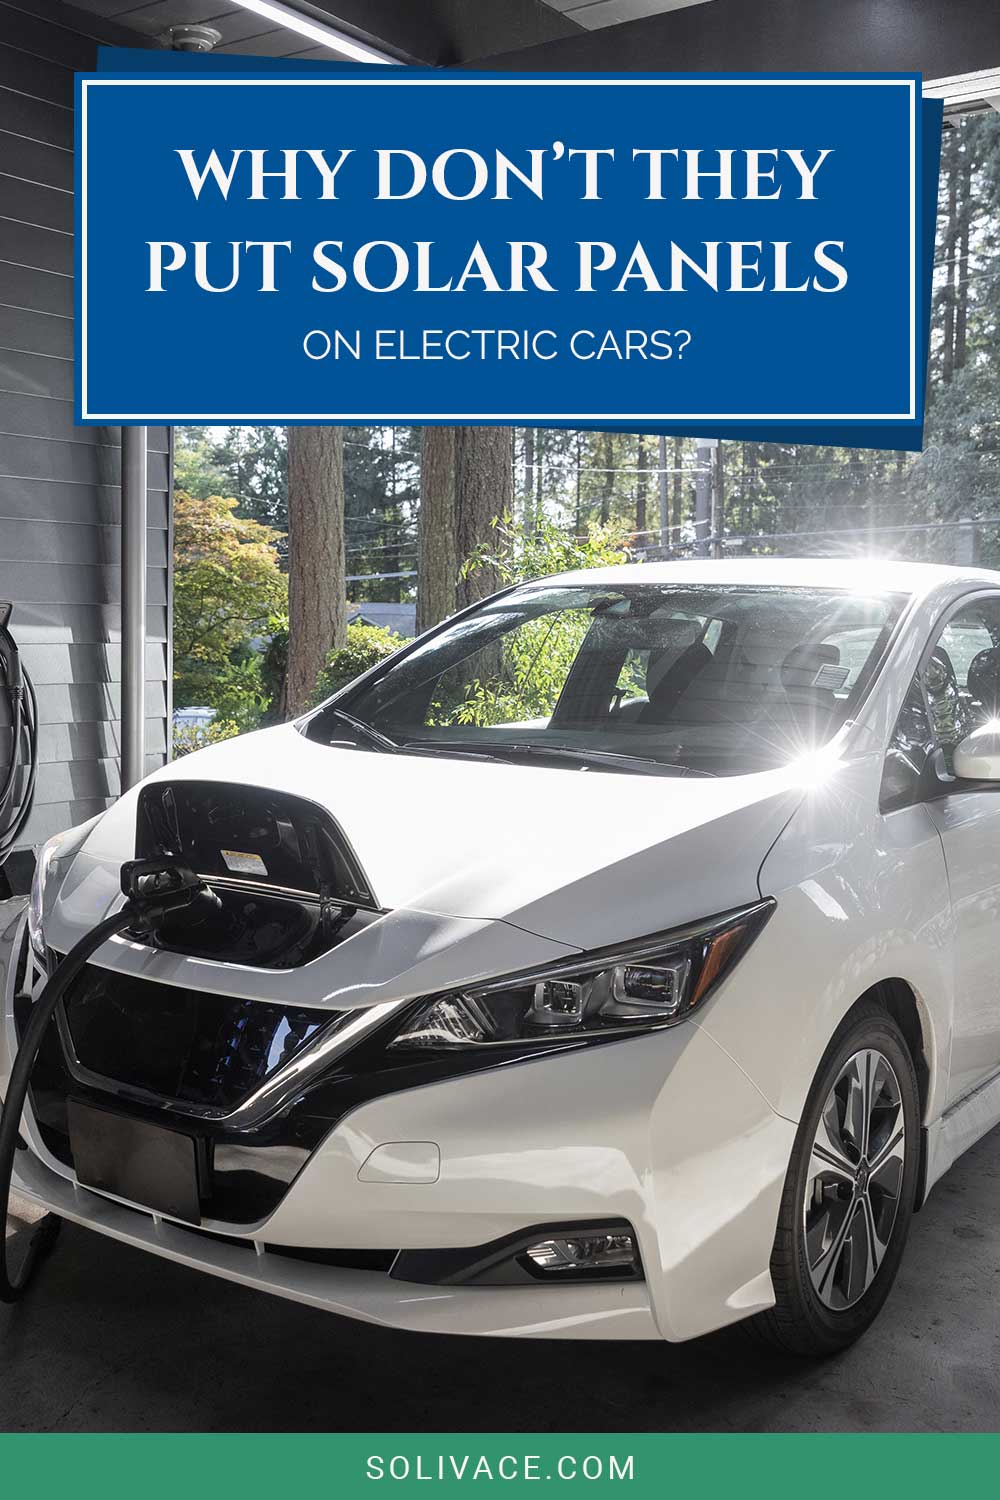 Why Don’t They Put Solar Panels On Electric Cars?